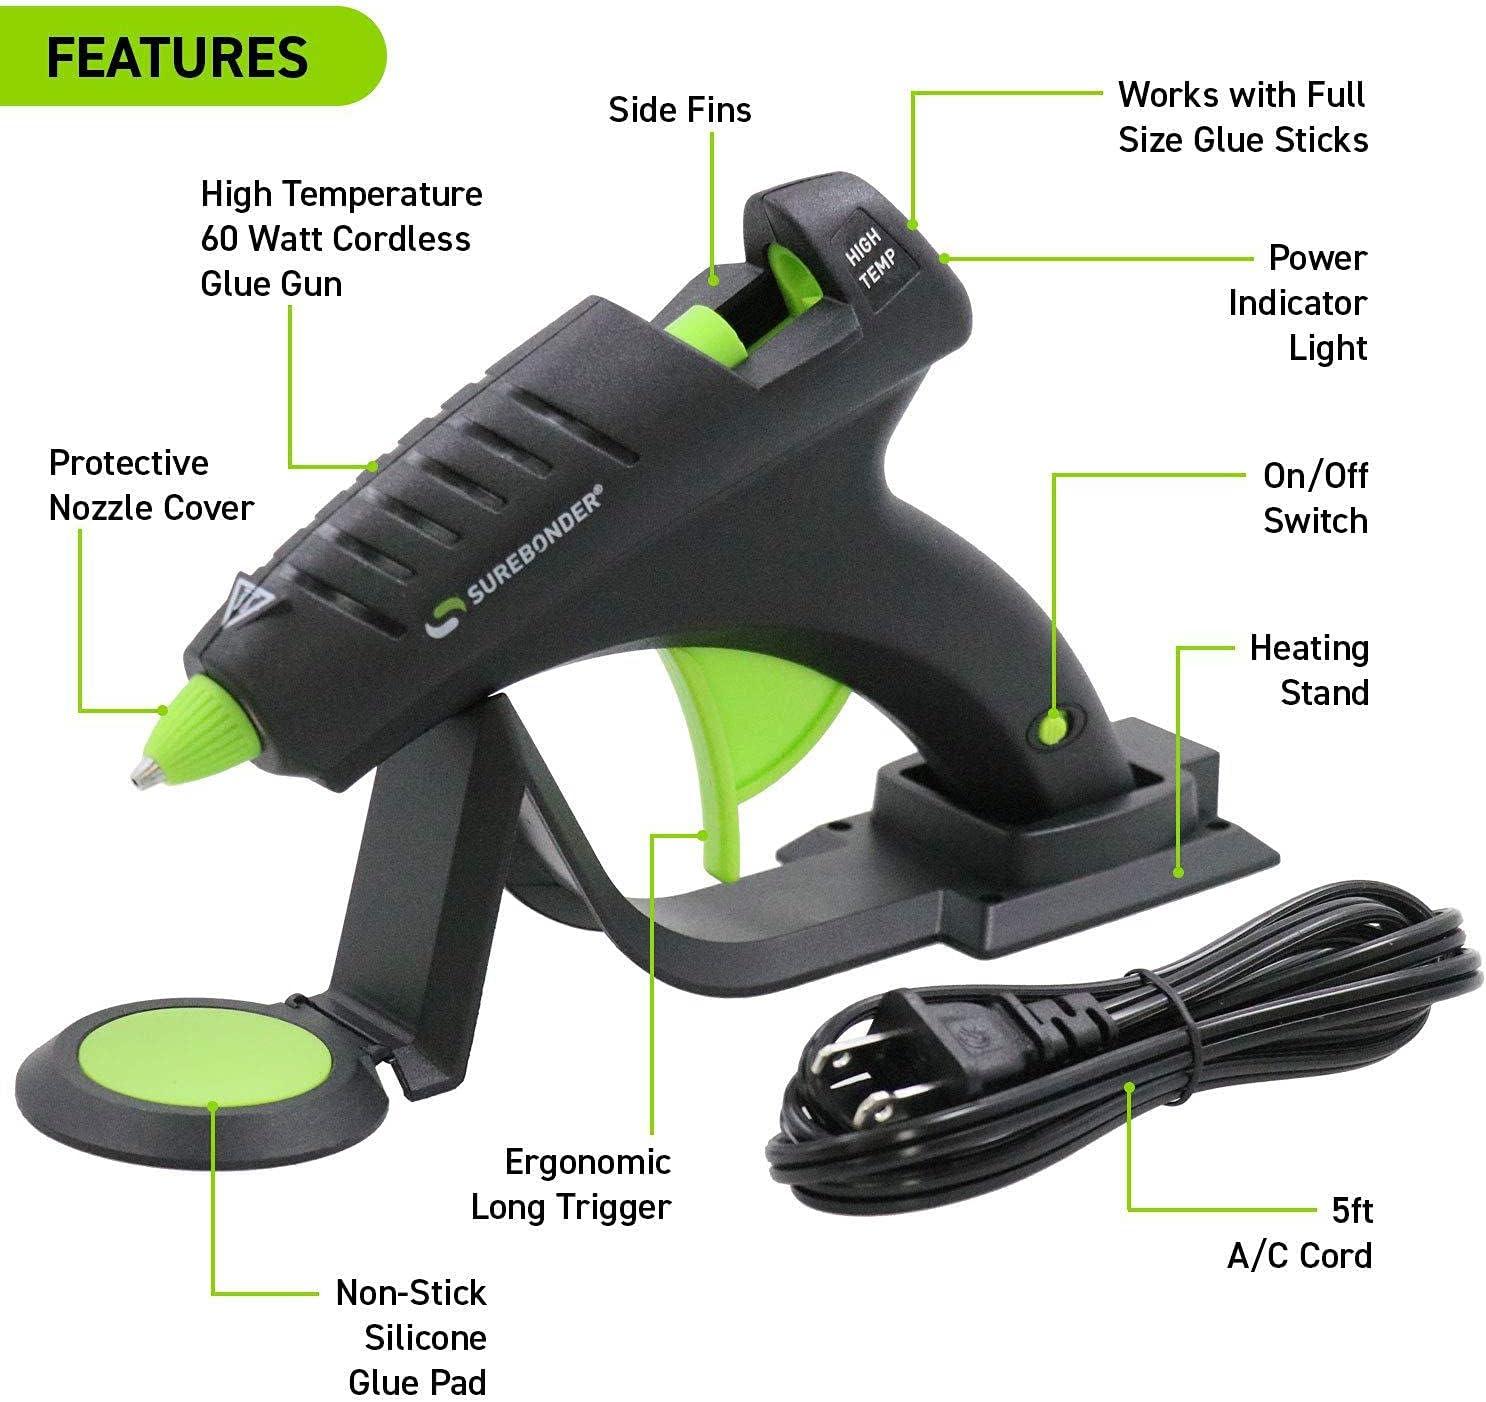 Surebonder Cordless Hot Glue Gun, High Temperature, Full Size, 60W, 50%  More Power - Sturdily Bonds Metal, Wood, Ceramics, Leather & Other Strong  Materials (Specialty Series CL-800F)